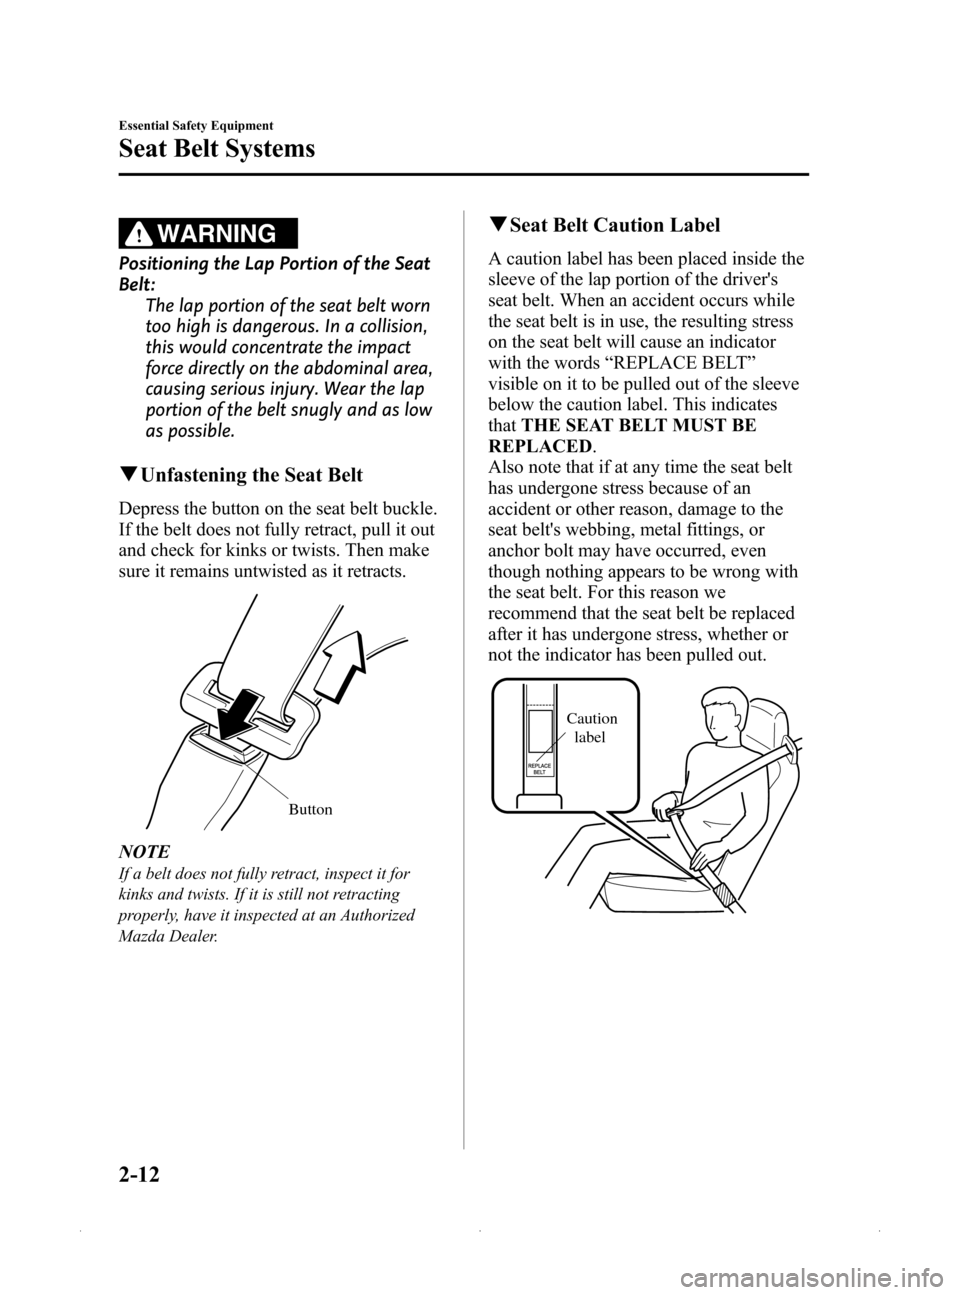 MAZDA MODEL MX-5 2015  Owners Manual (in English) Black plate (24,1)
WARNING
Positioning the Lap Portion of the Seat
Belt:The lap portion of the seat belt worn
too high is dangerous. In a collision,
this would concentrate the impact
force directly on